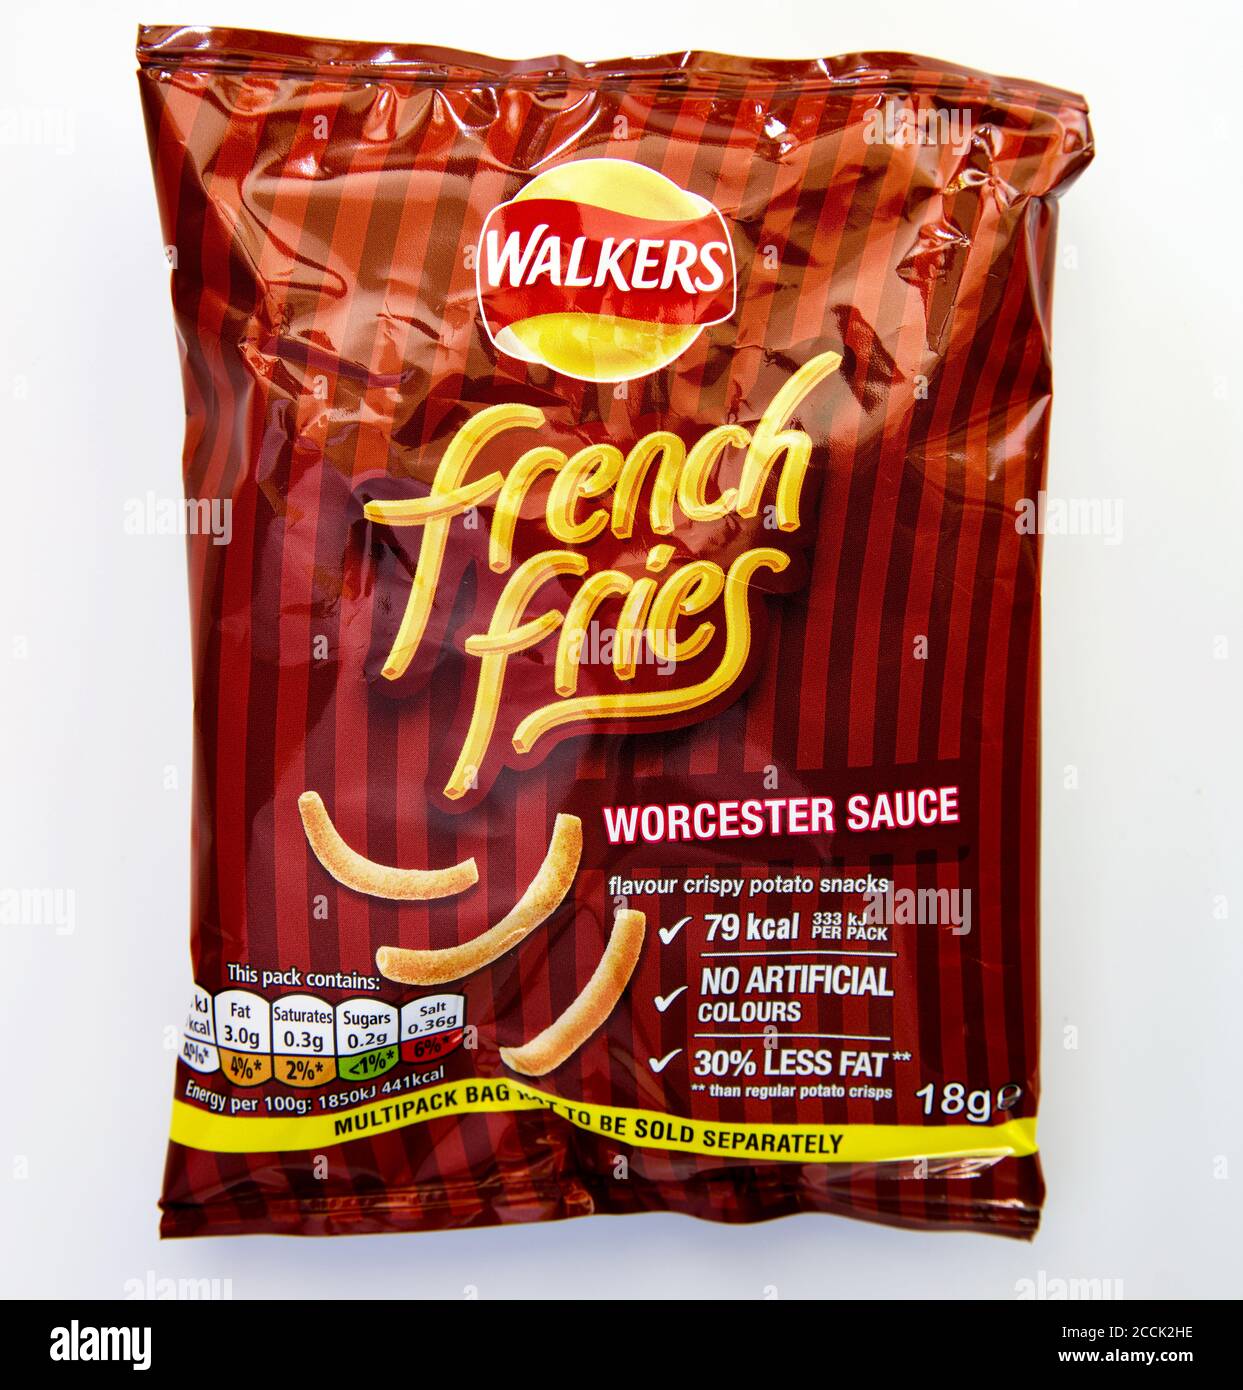 Walkers - French Fries Worcester Sauce Flavour Stock Photo